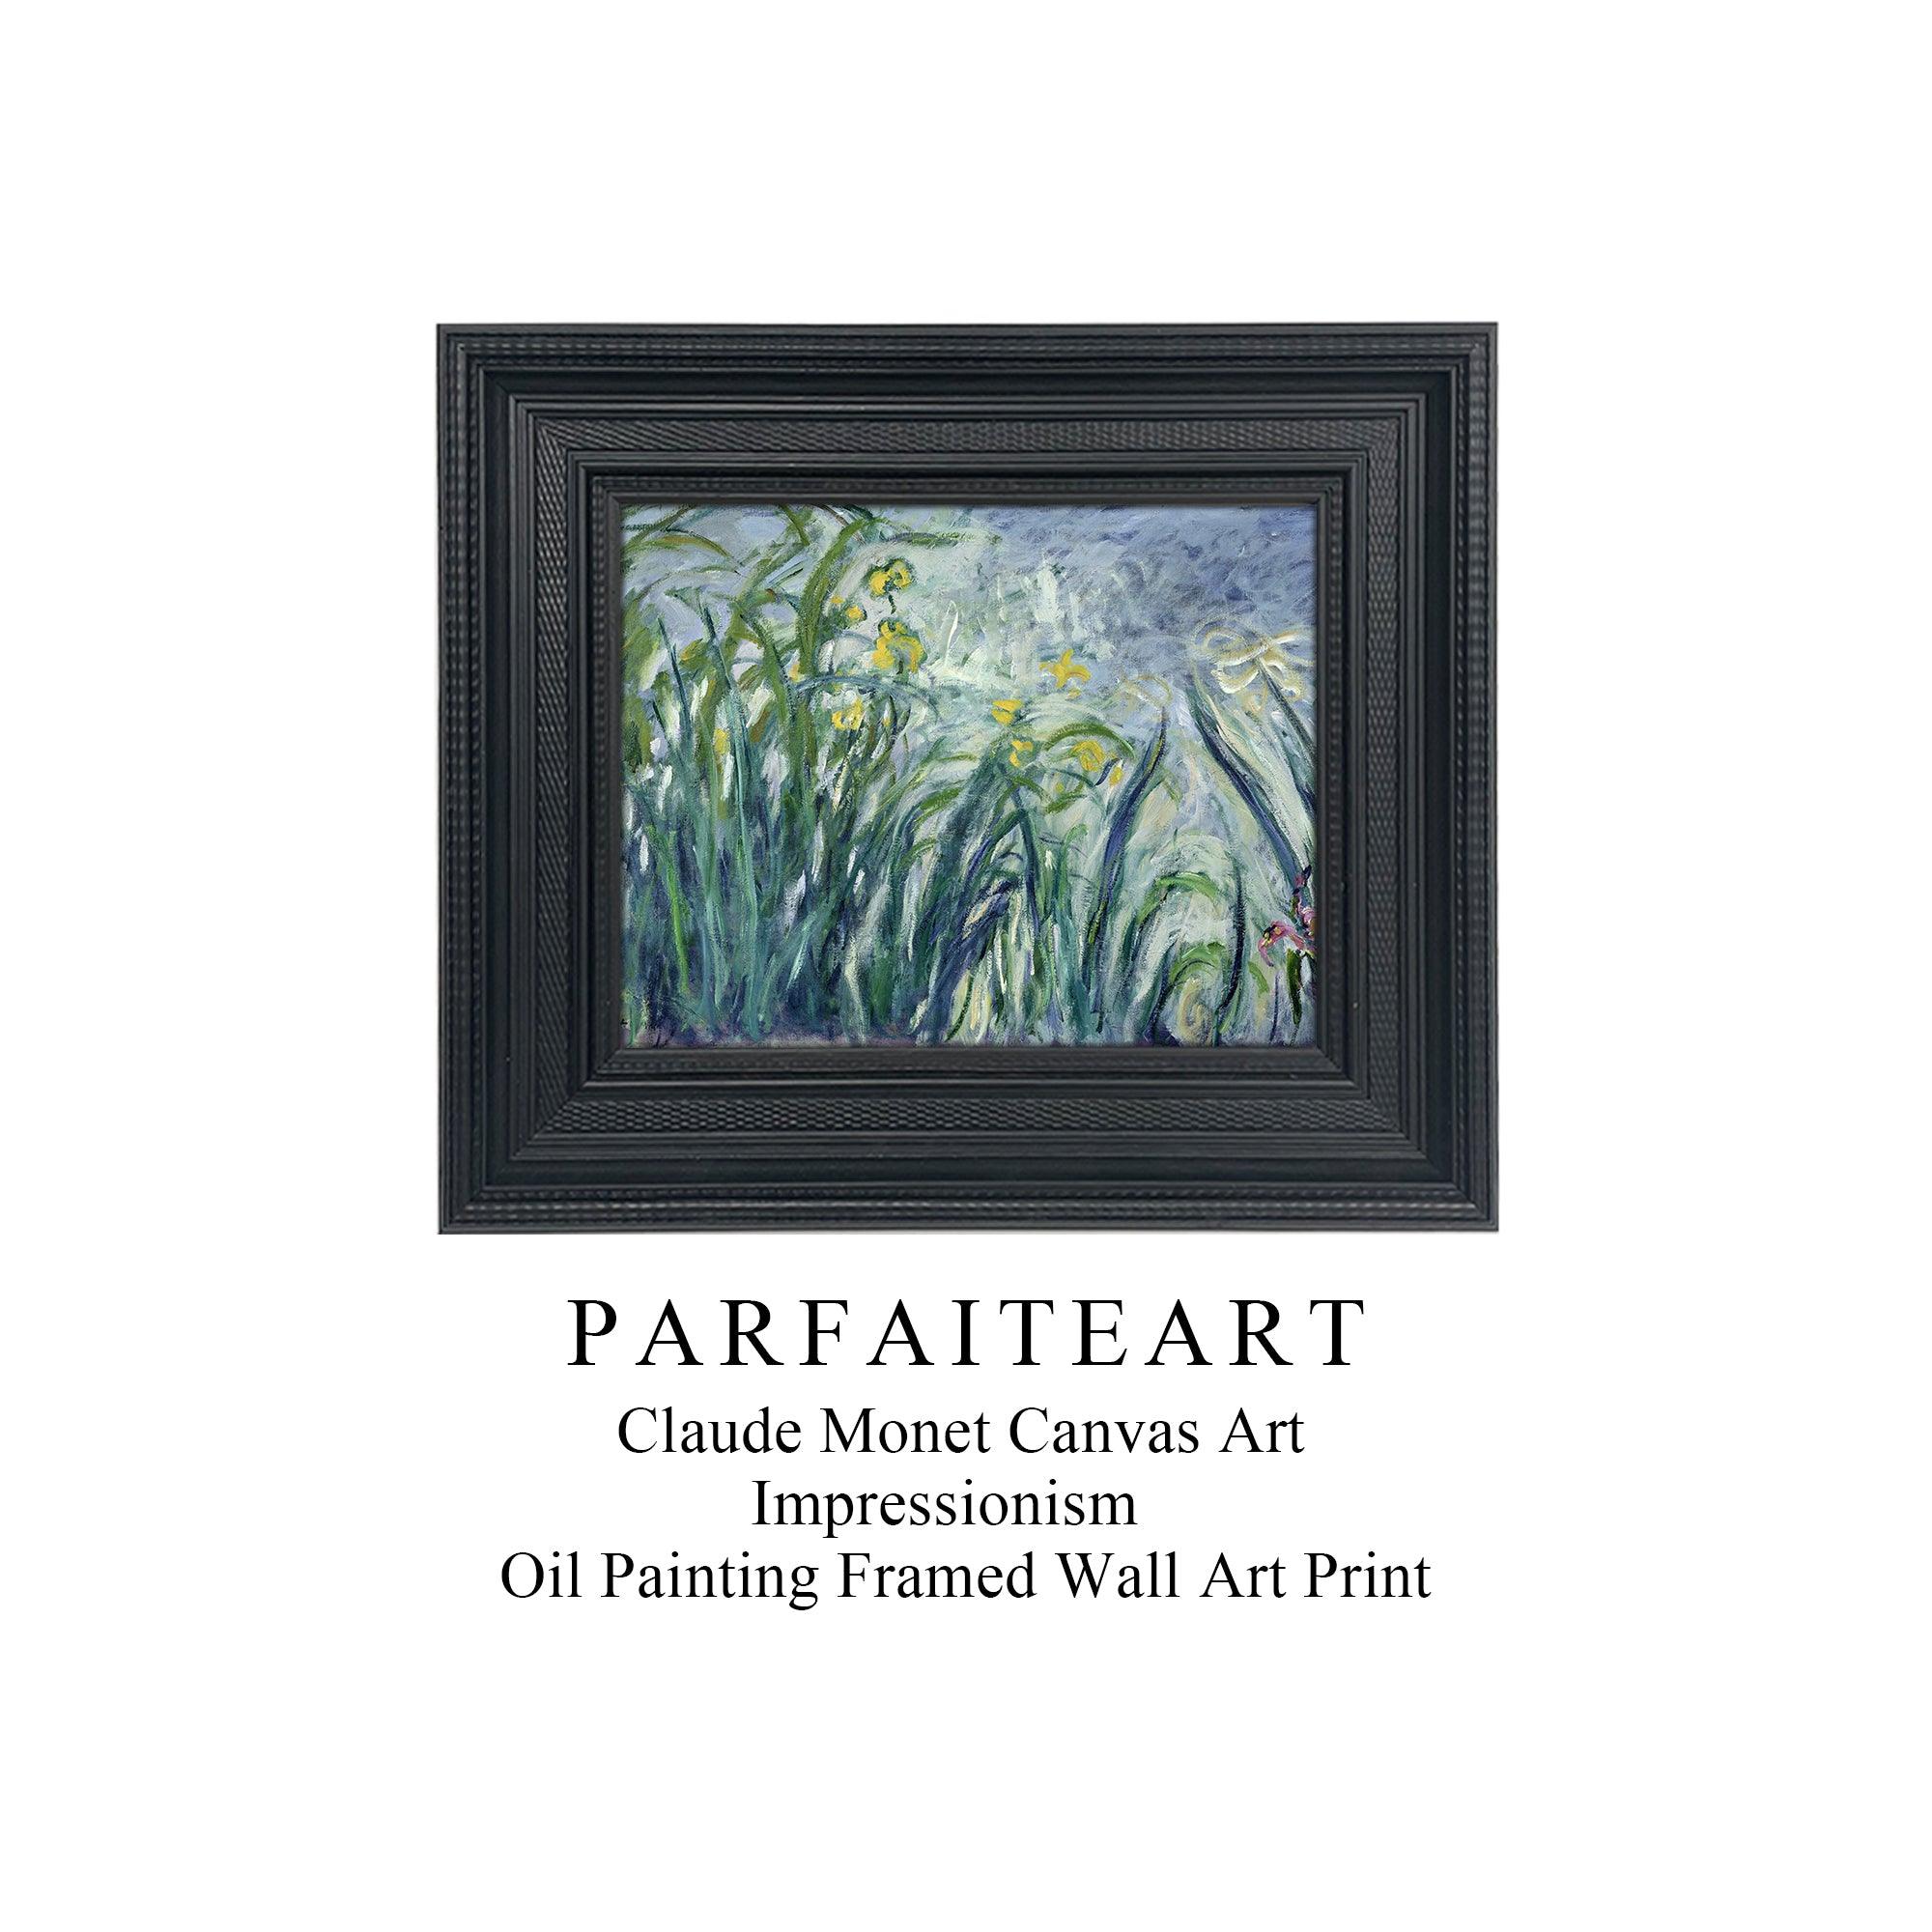 Famous Painting Print，Claude Monet，Moody Wall Decor，Black Vintage Frame,Solid Wood,High-Quality Waterproof Decorative Canvas Art， Hotel Aisle Living Room Home Decor Art 18x15 inches 3 Black